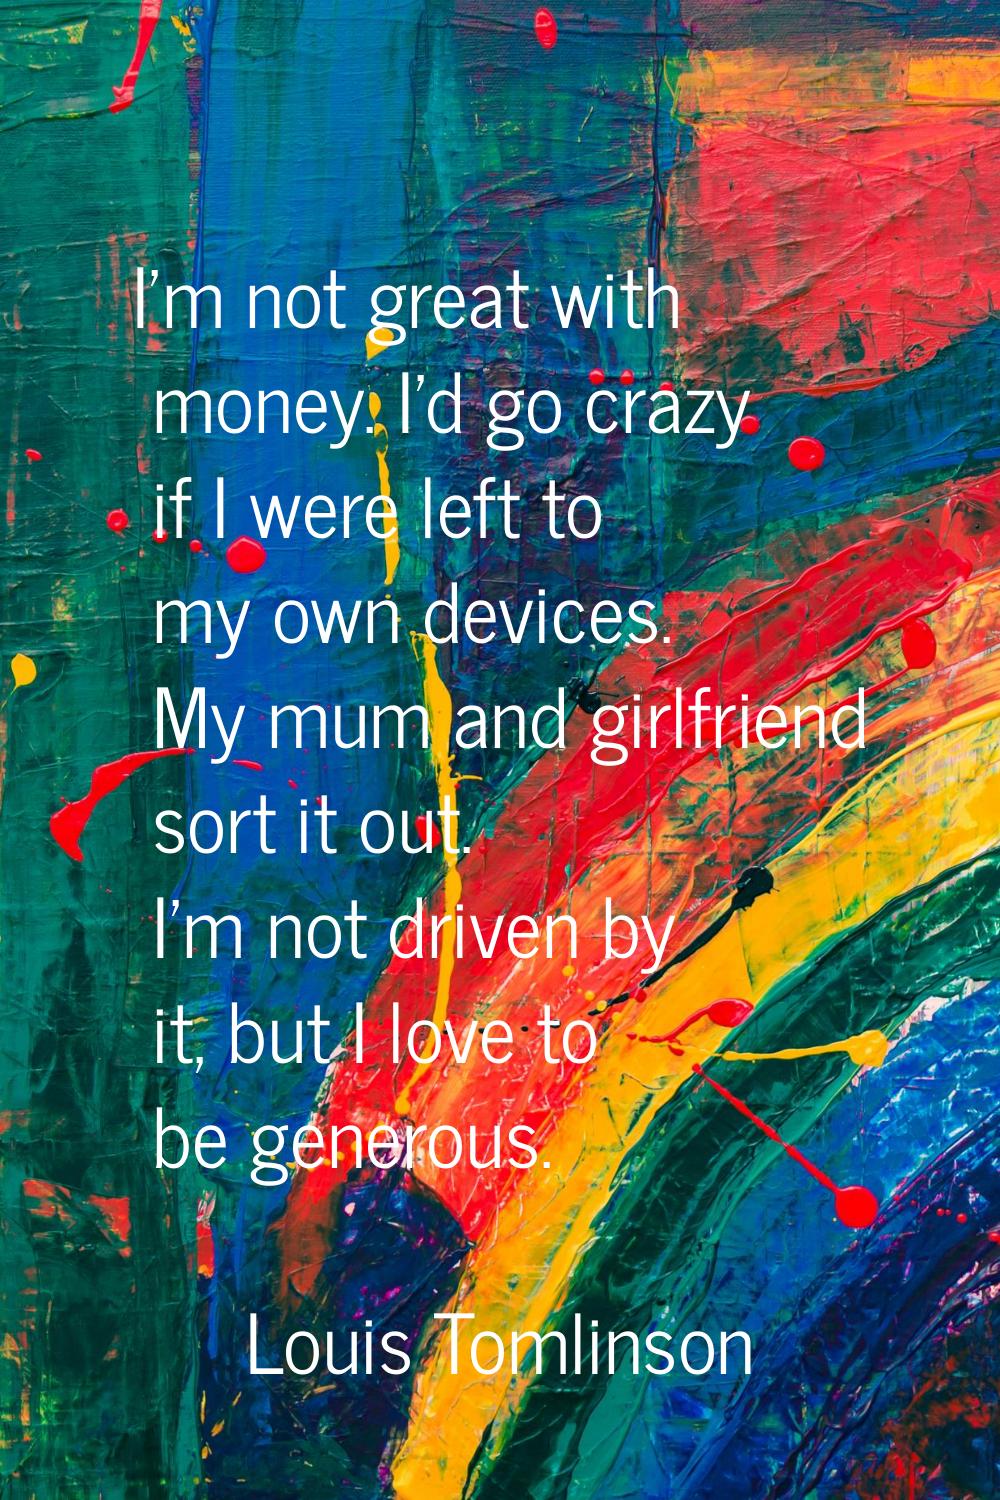 I'm not great with money. I'd go crazy if I were left to my own devices. My mum and girlfriend sort